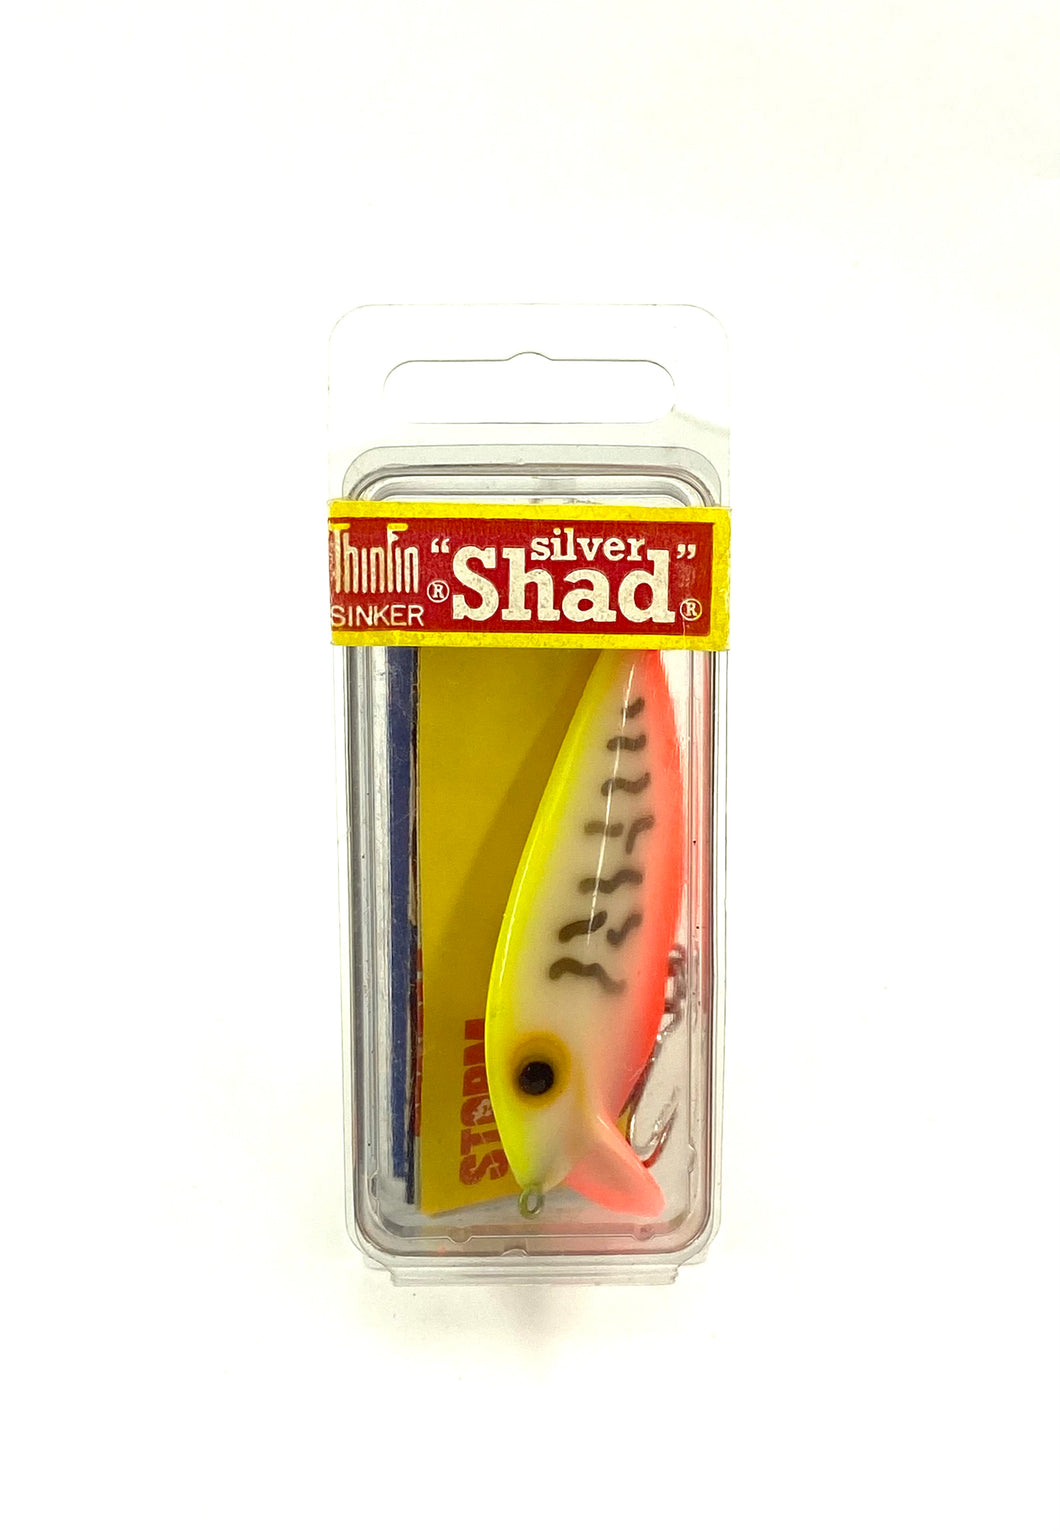 STORM LURES ThinFin Sinker SILVER SHAD TS39 Fishing Lure in BONE CRAWDAD